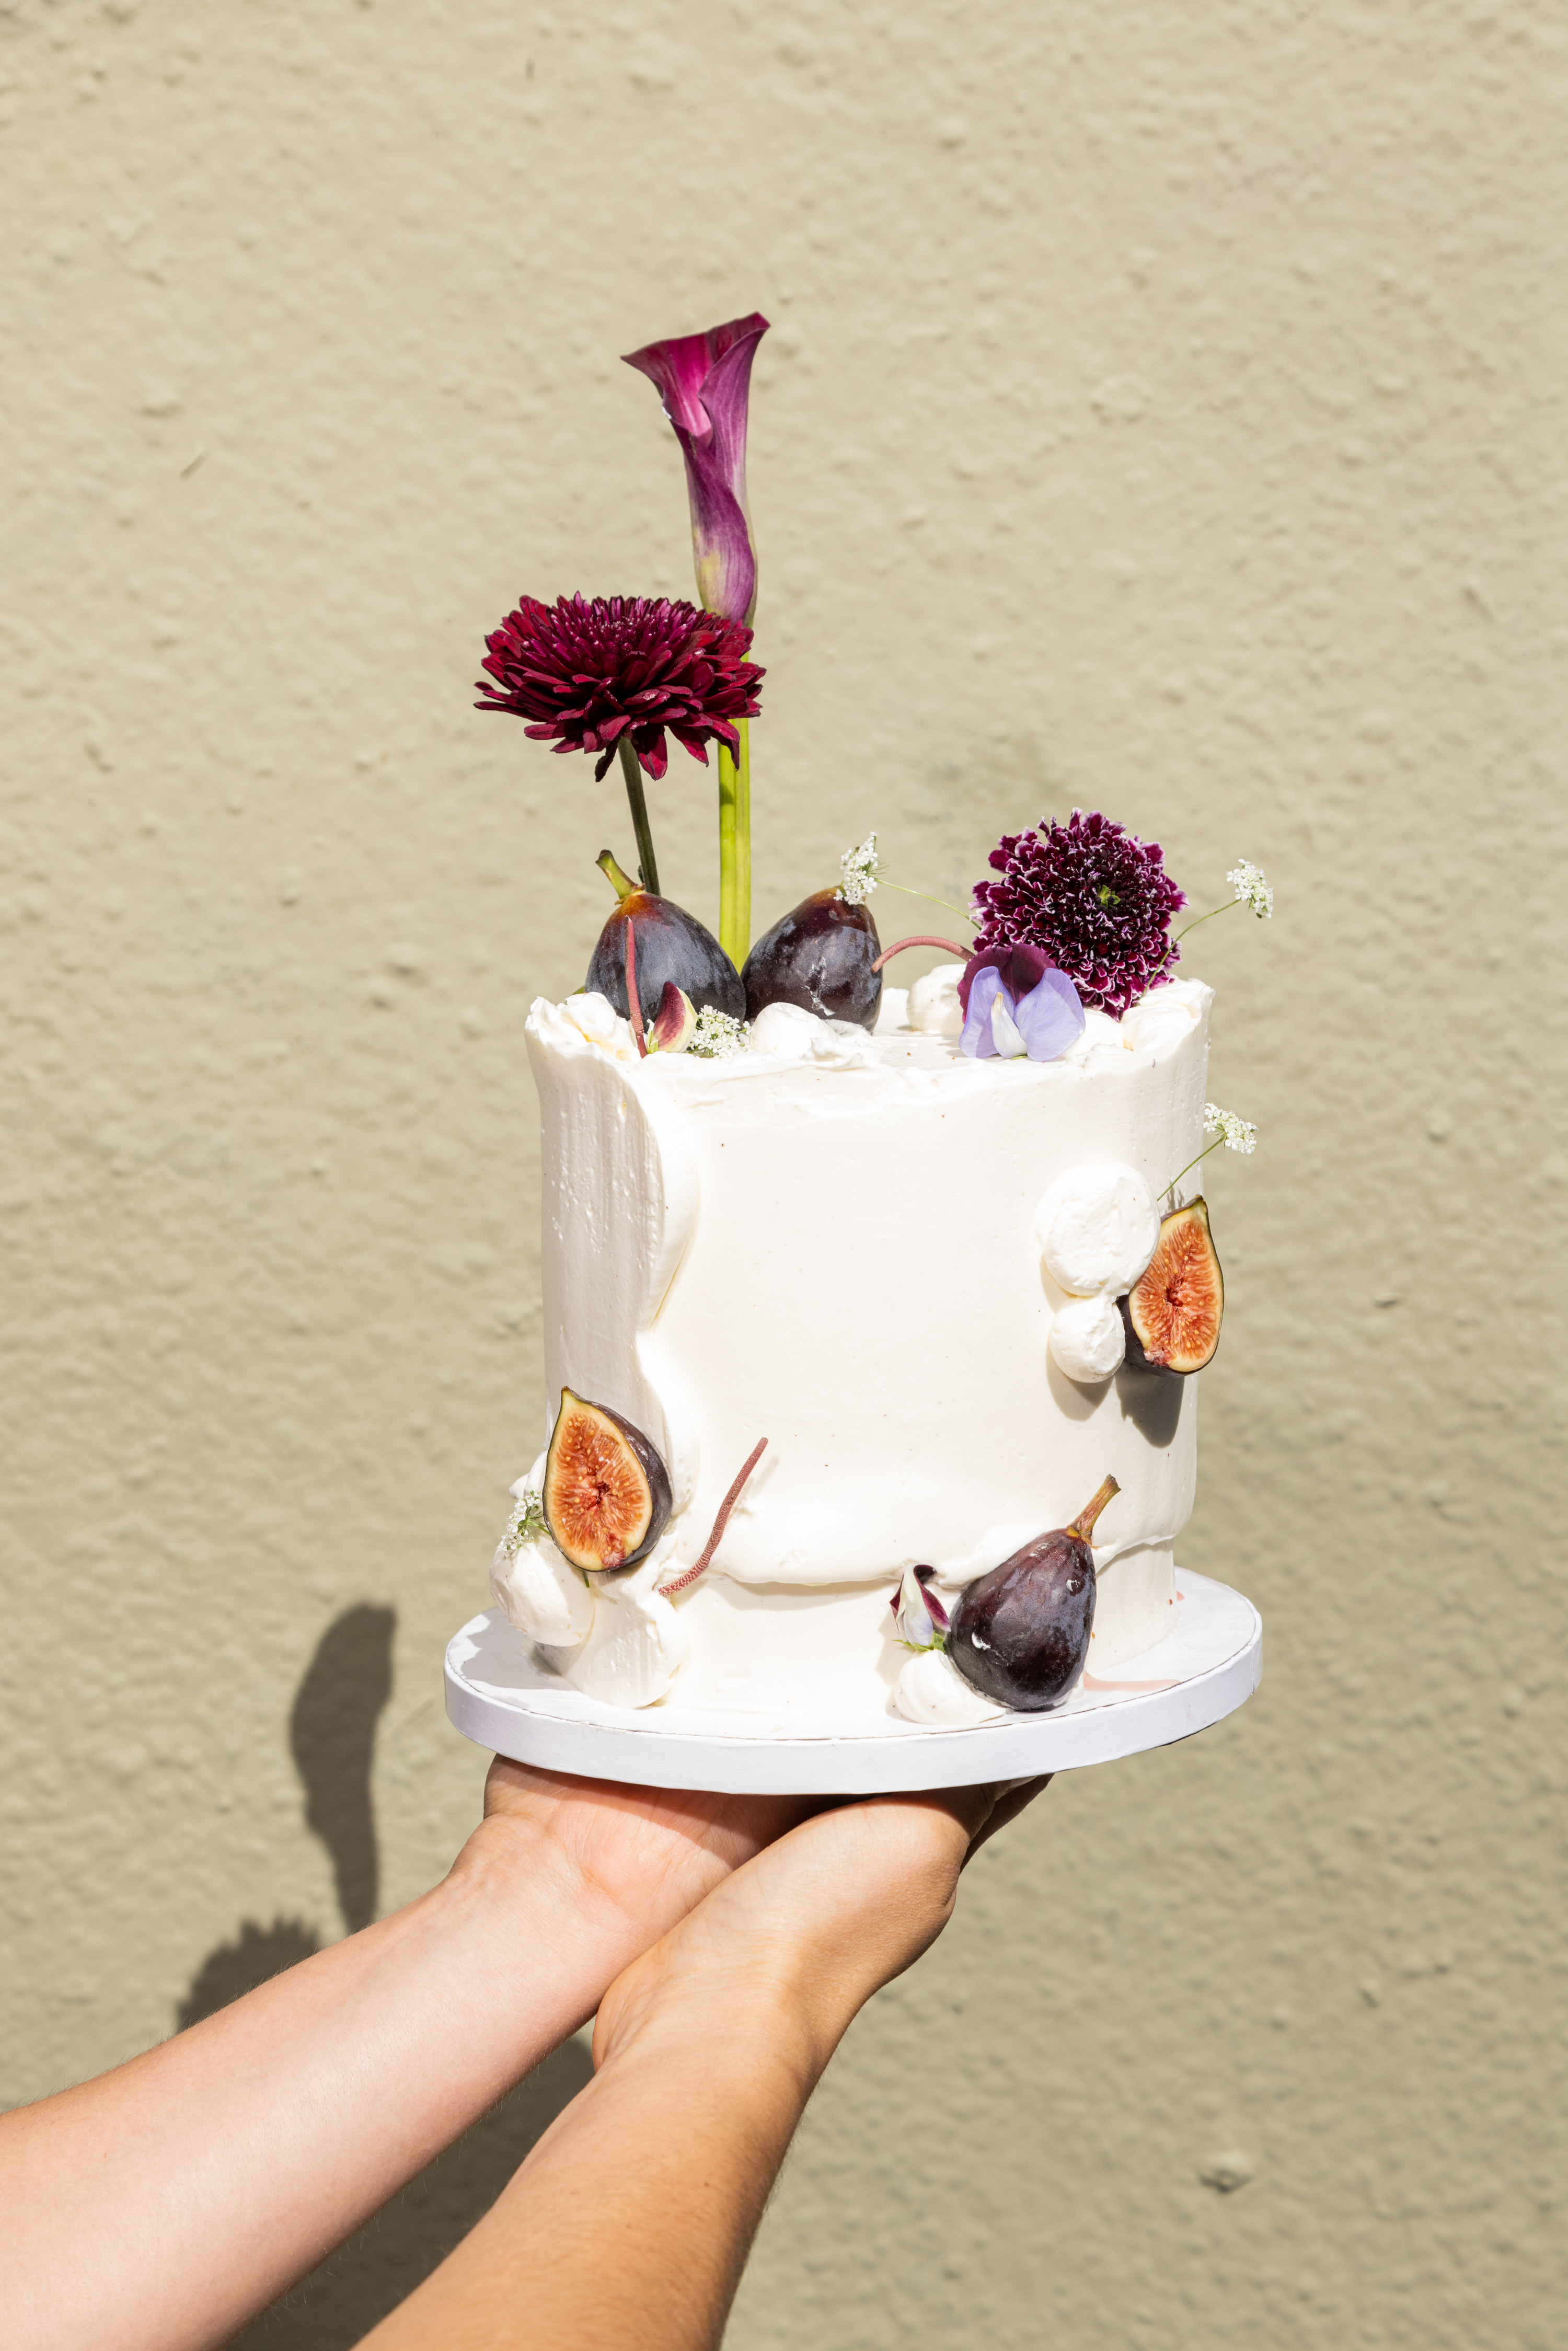 A hand holds a small cake with white frosting, decorated with figs, flowers, and a shadow on a sunlit wall.